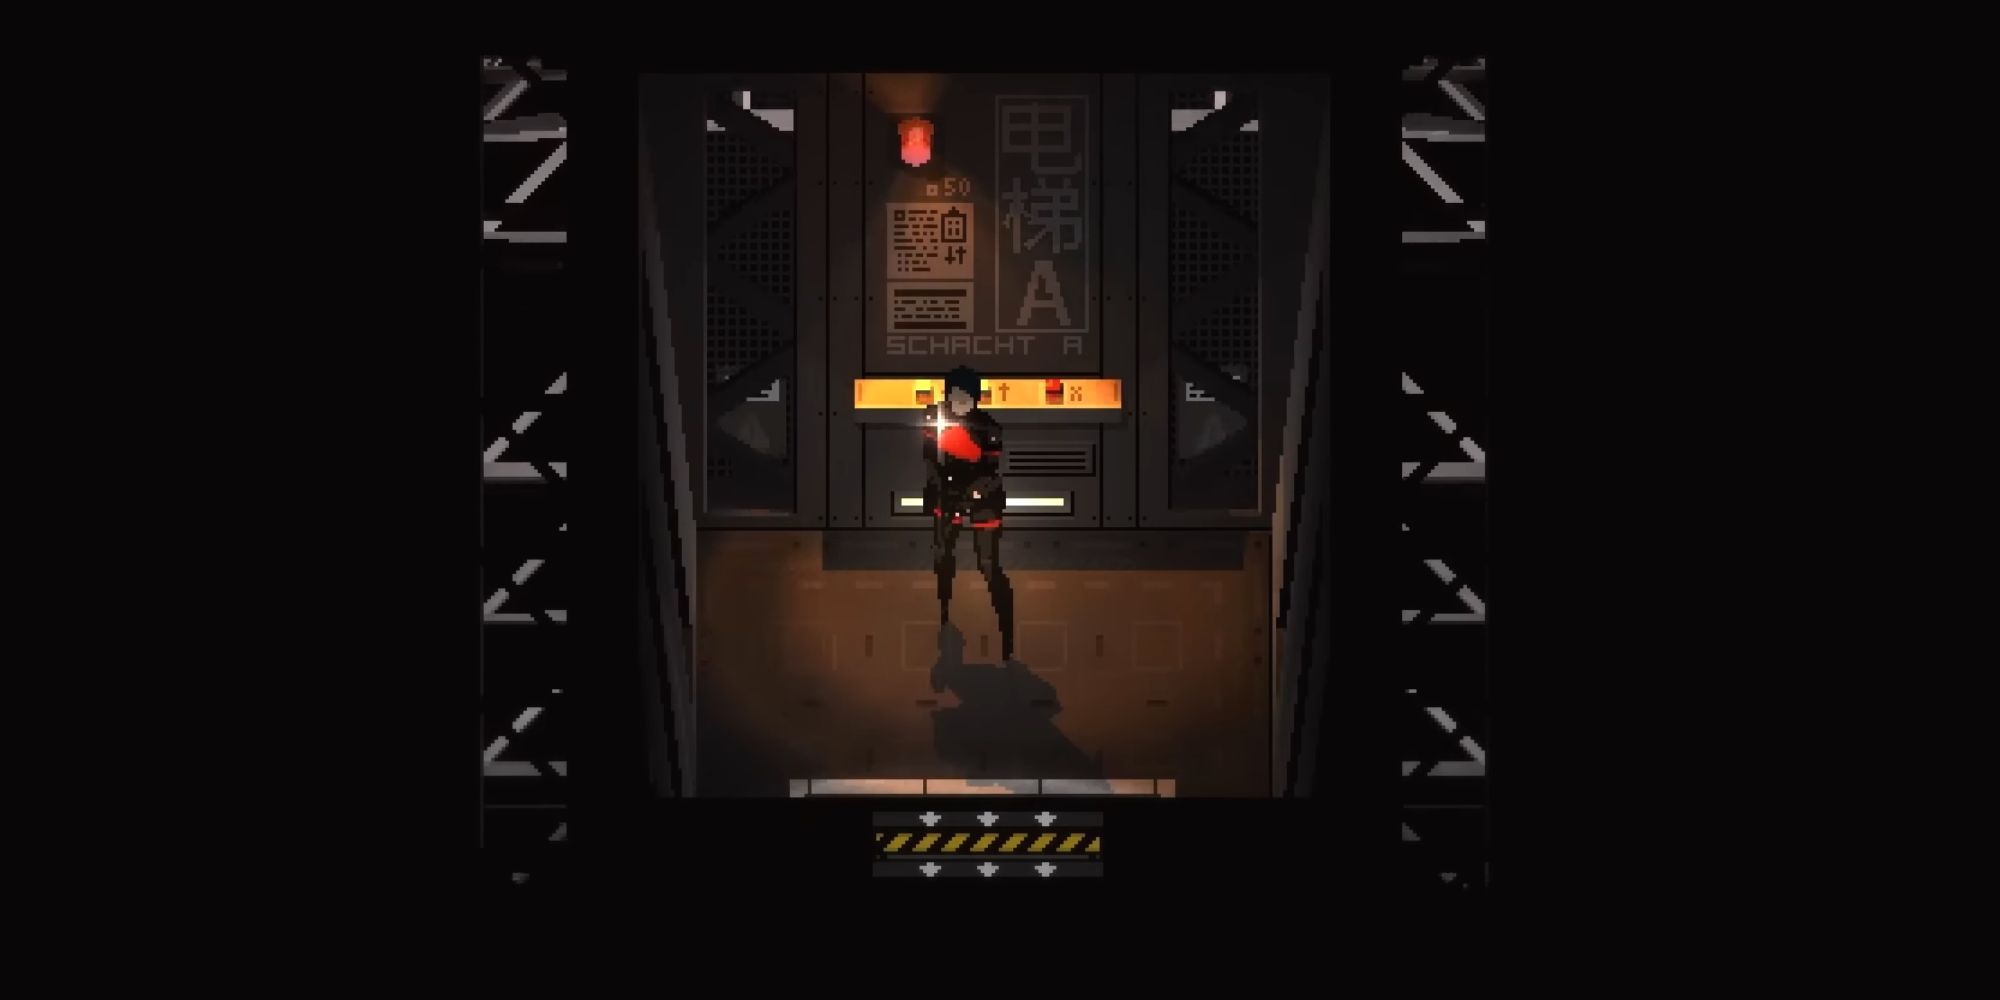 Elster riding an elevator. Black borders are on either side.